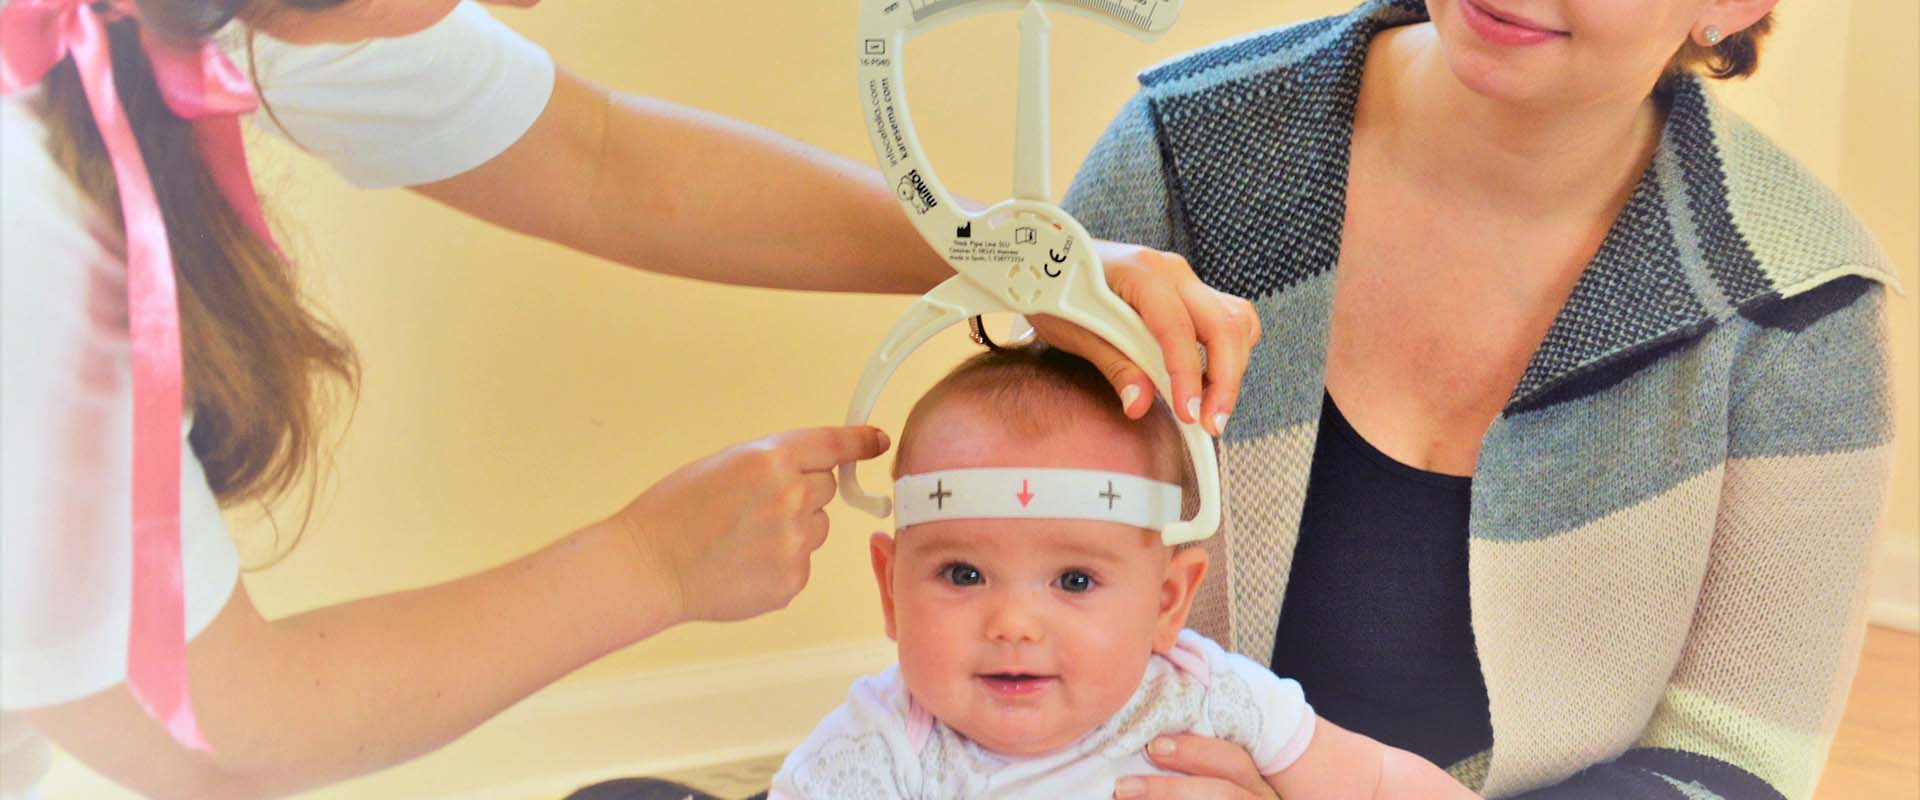 Pediatric Therapy for Plagiocephaly with Angella Marcotte - The Baby Movement Specialist